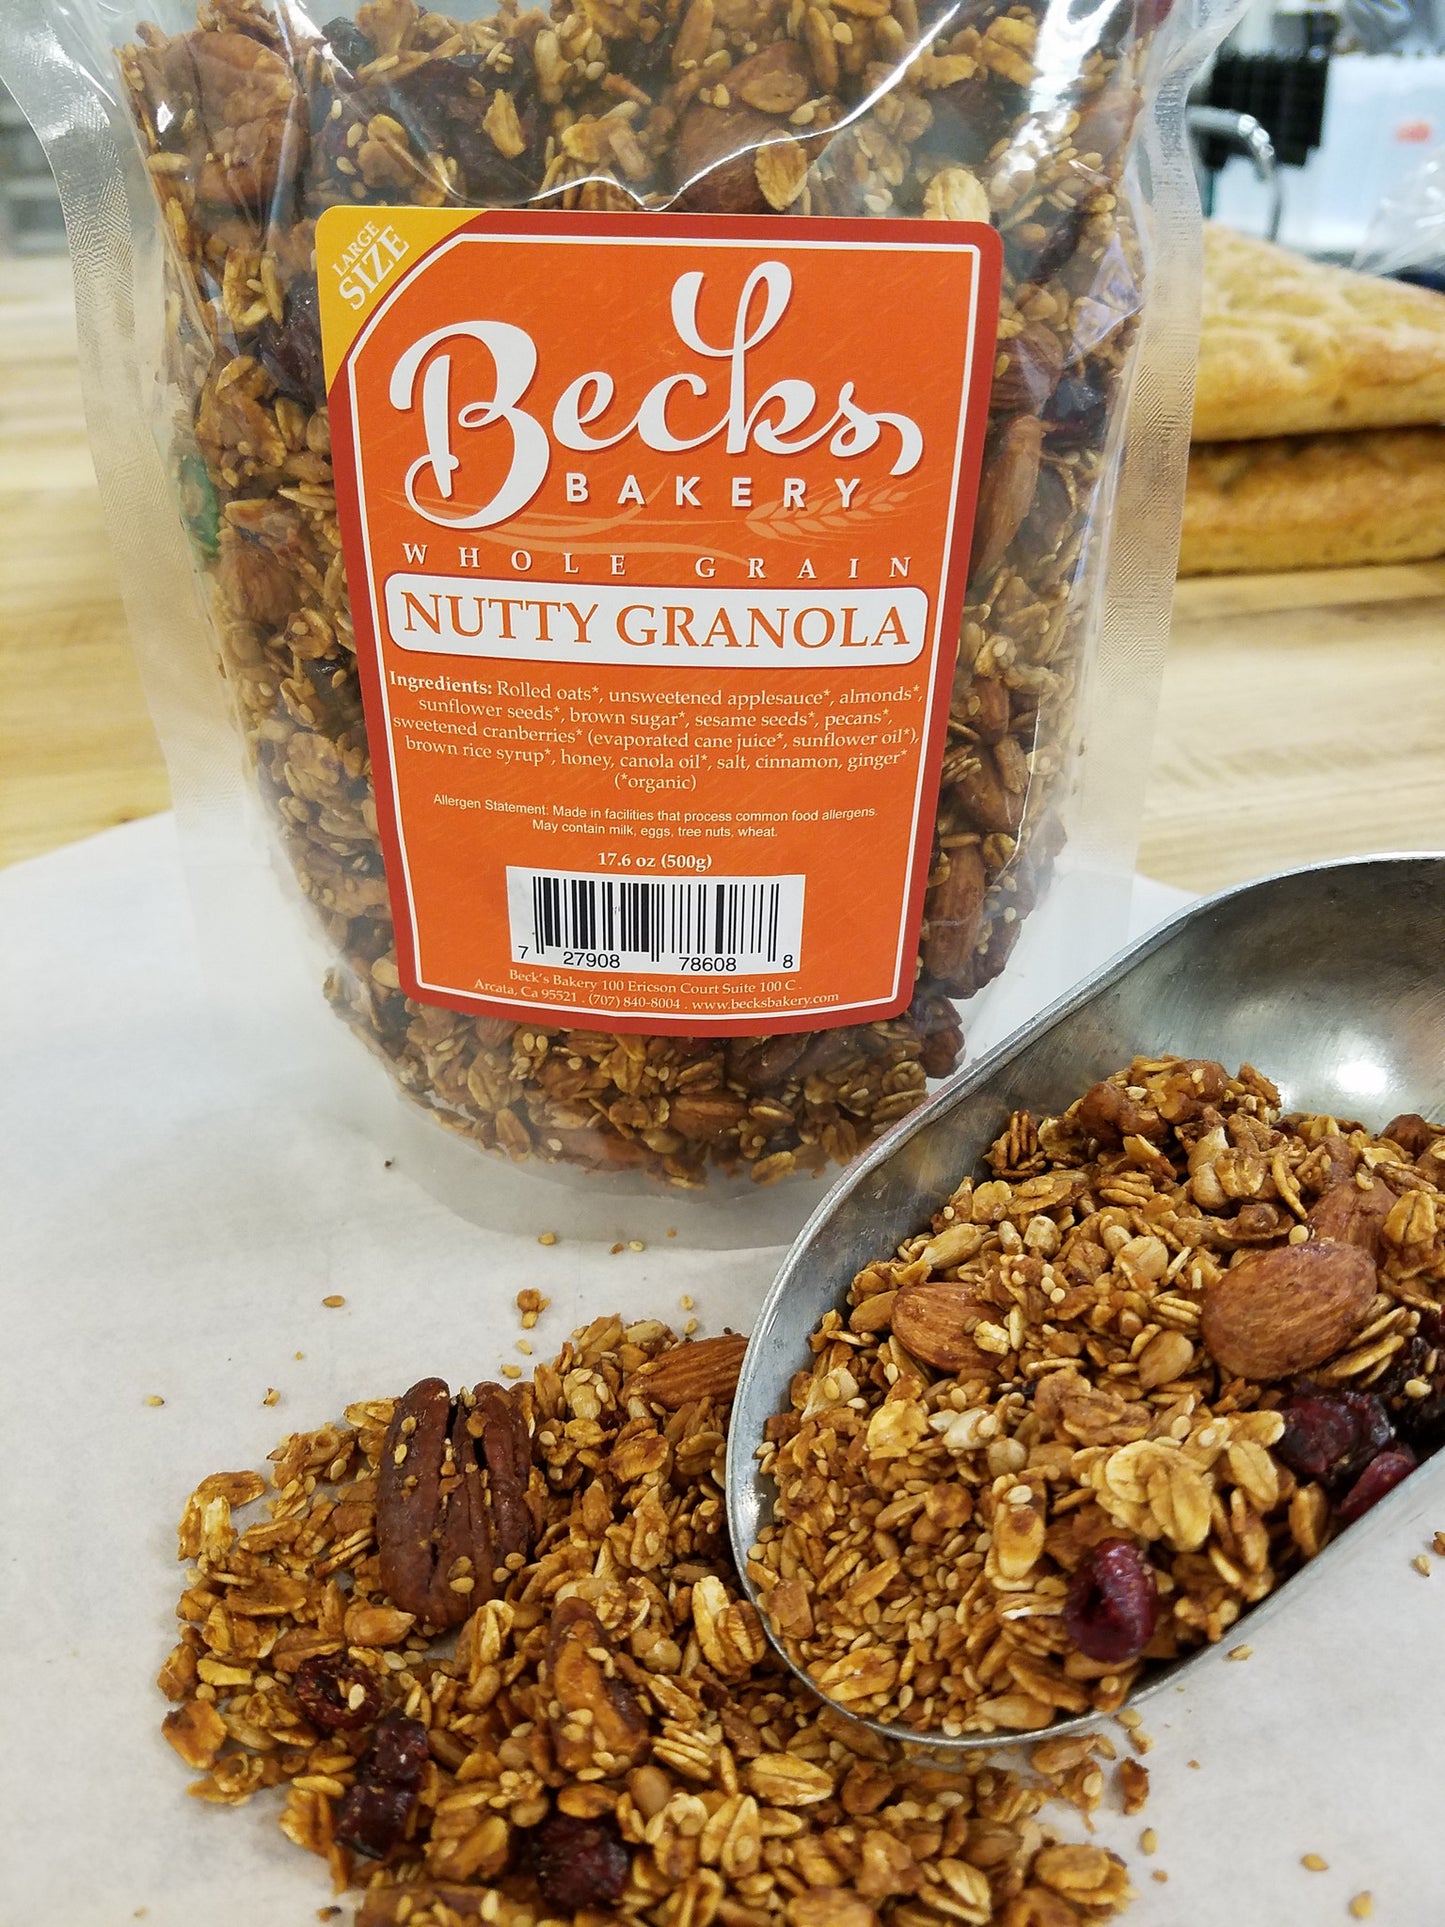 Nutty Granola - for local pick-up only!